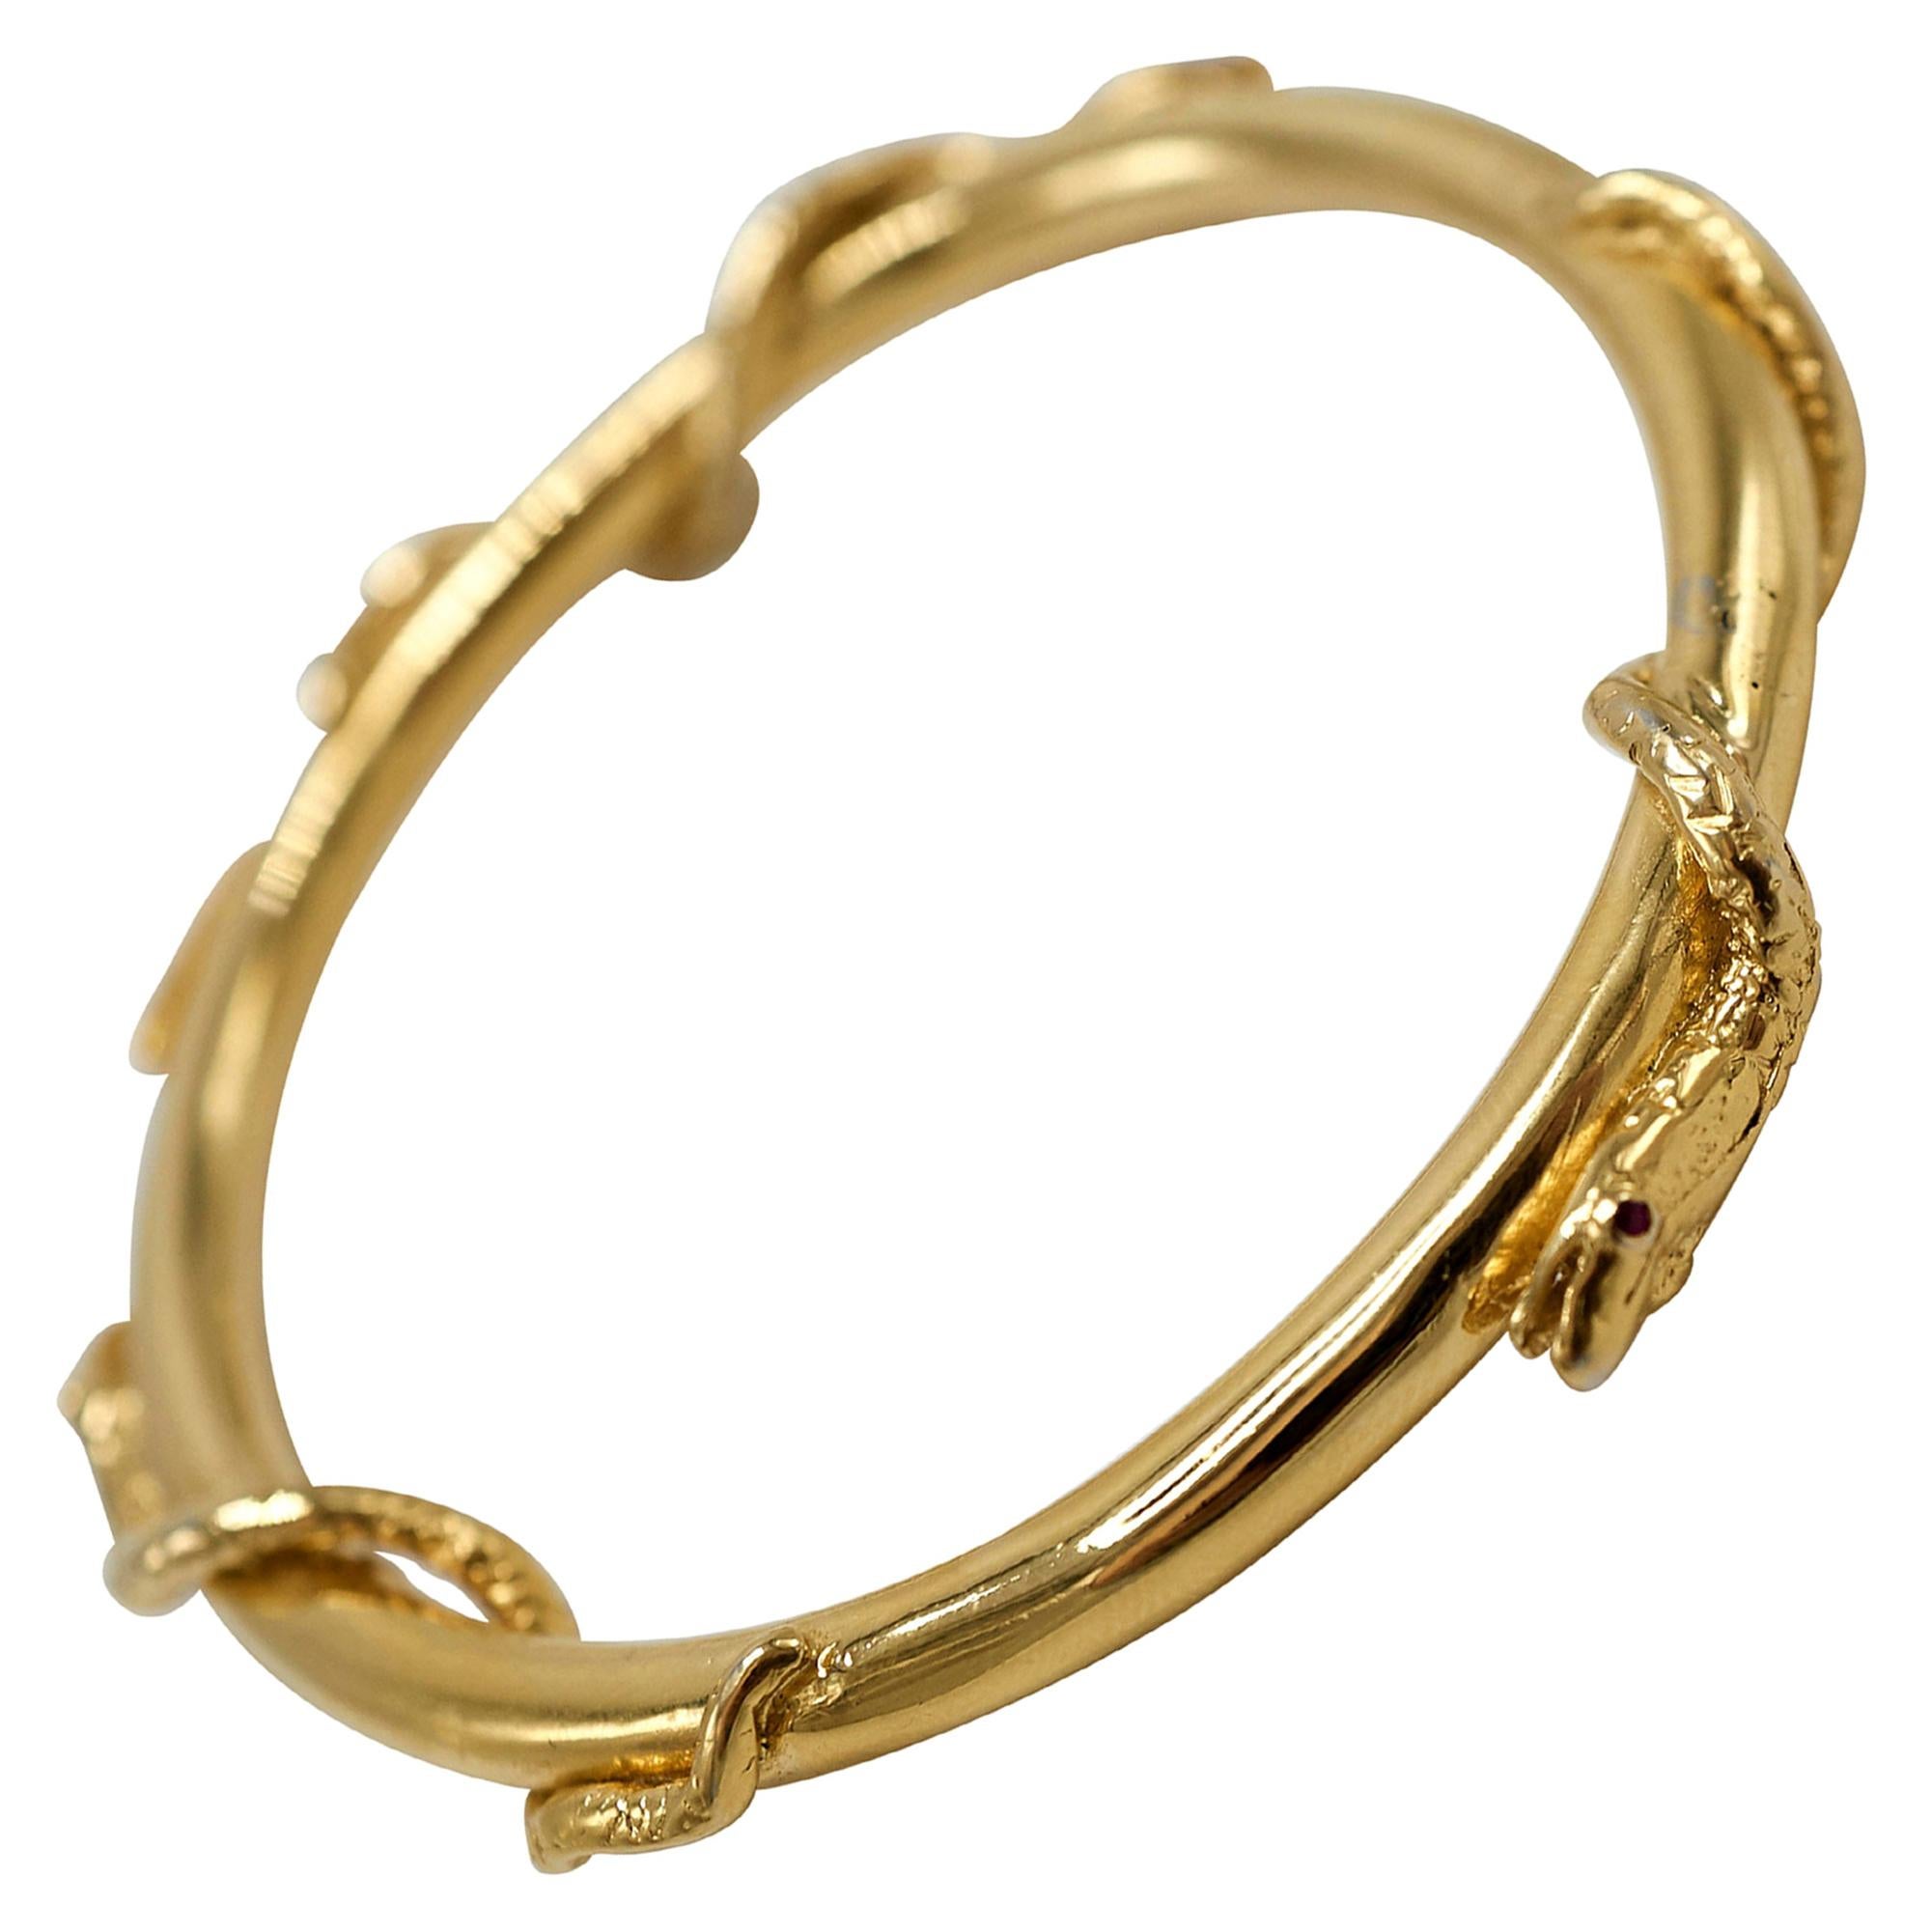 Snake Bangle 14 k Gold Bracelet Emerald Ruby Blue Sapphire J Dauphin

J DAUPHIN Bangle Arm Cuff with 3 snakes  in solid 4k Gold weighs around 40 gram.

Historically, serpents and snakes represent fertility or a creative life force. As snakes shed